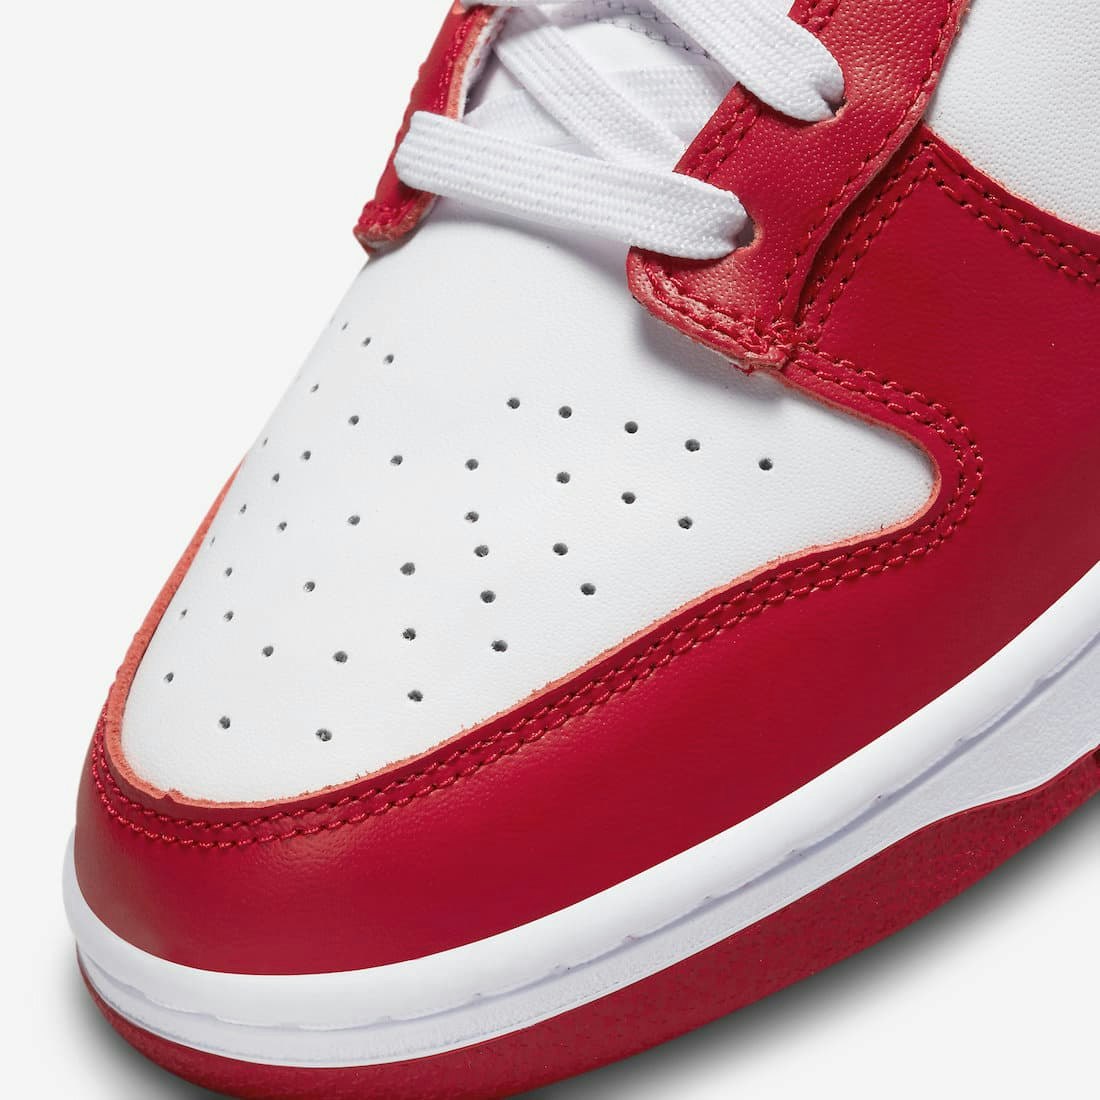 Nike Dunk Low "Gym Red" 